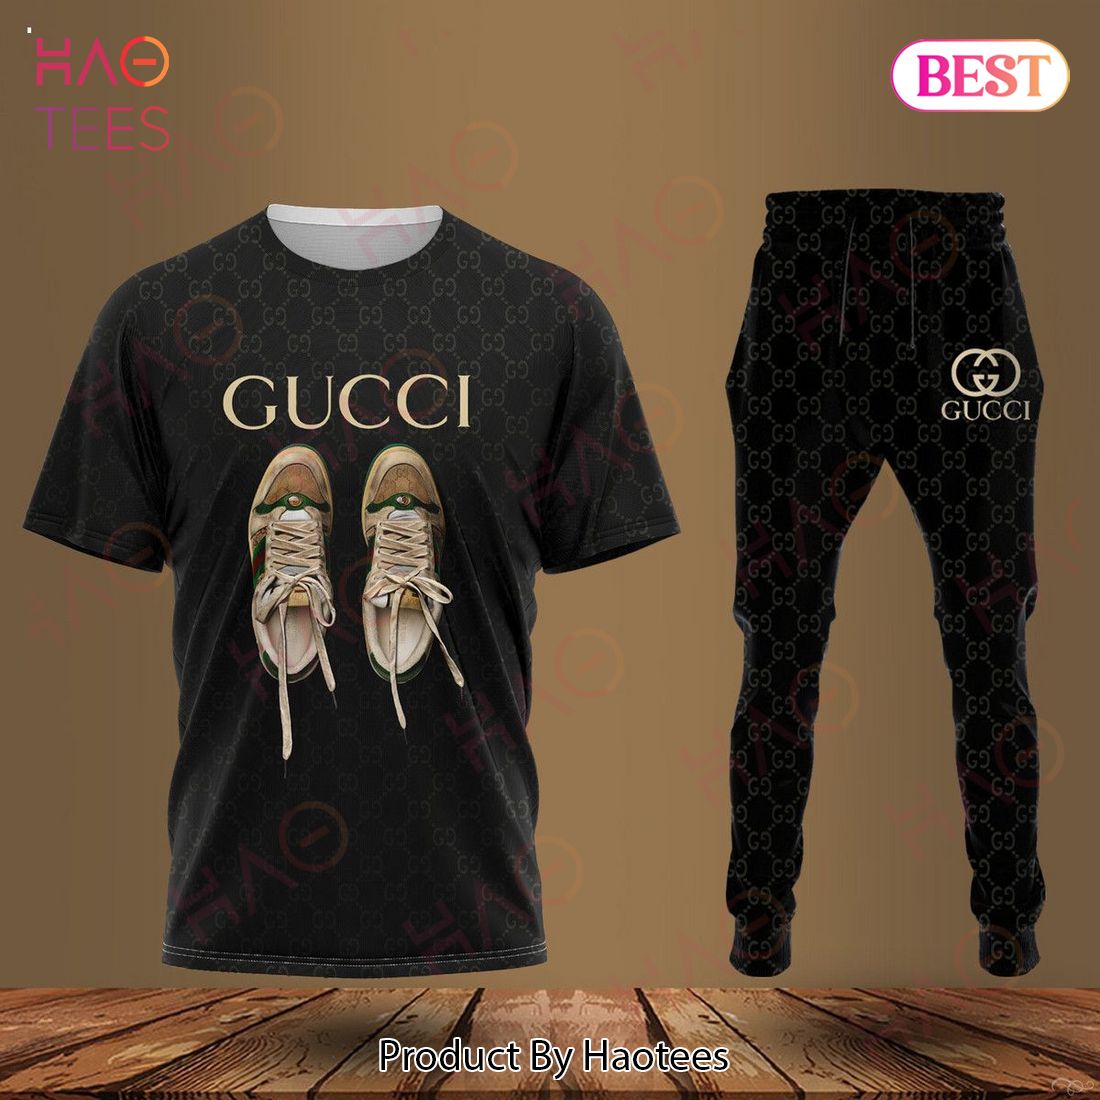 Gucci Black Mix Printing Pattern Luxury Brand T-Shirt And Pants Limited Edition